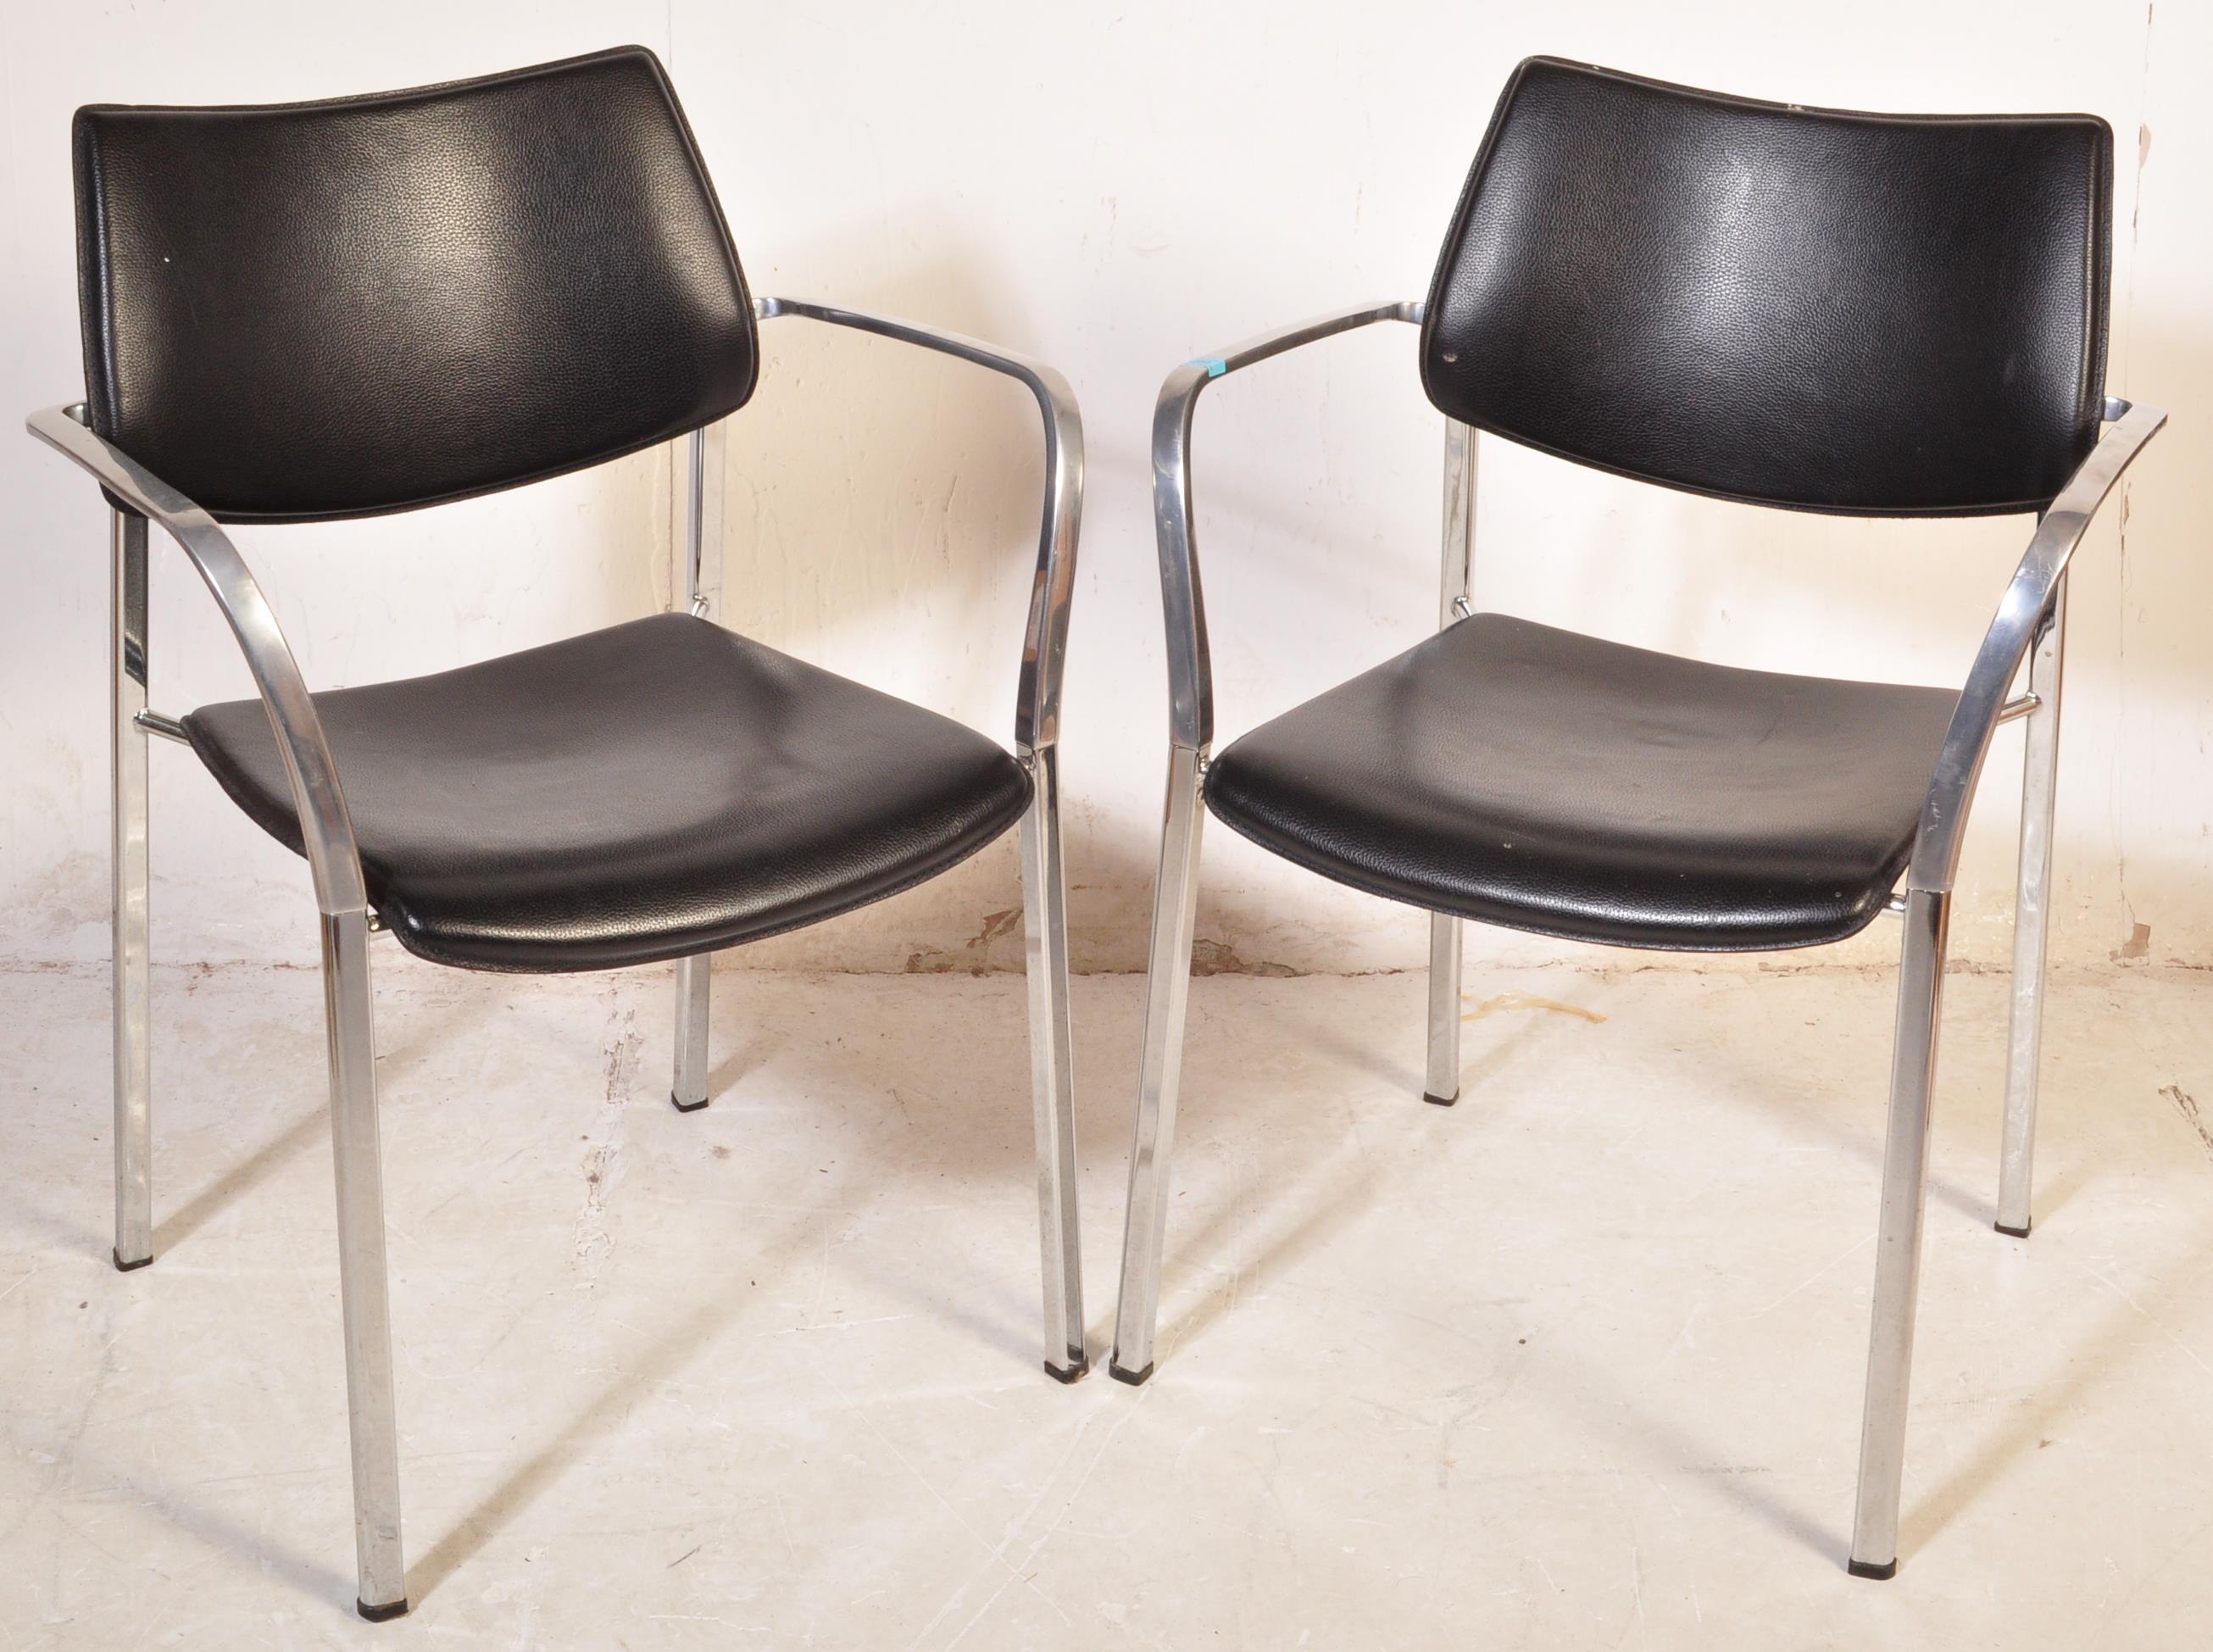 PAIR OF MID CENTURY BLACK LEATHERETTE & CHROME CHAIRS - Image 2 of 7